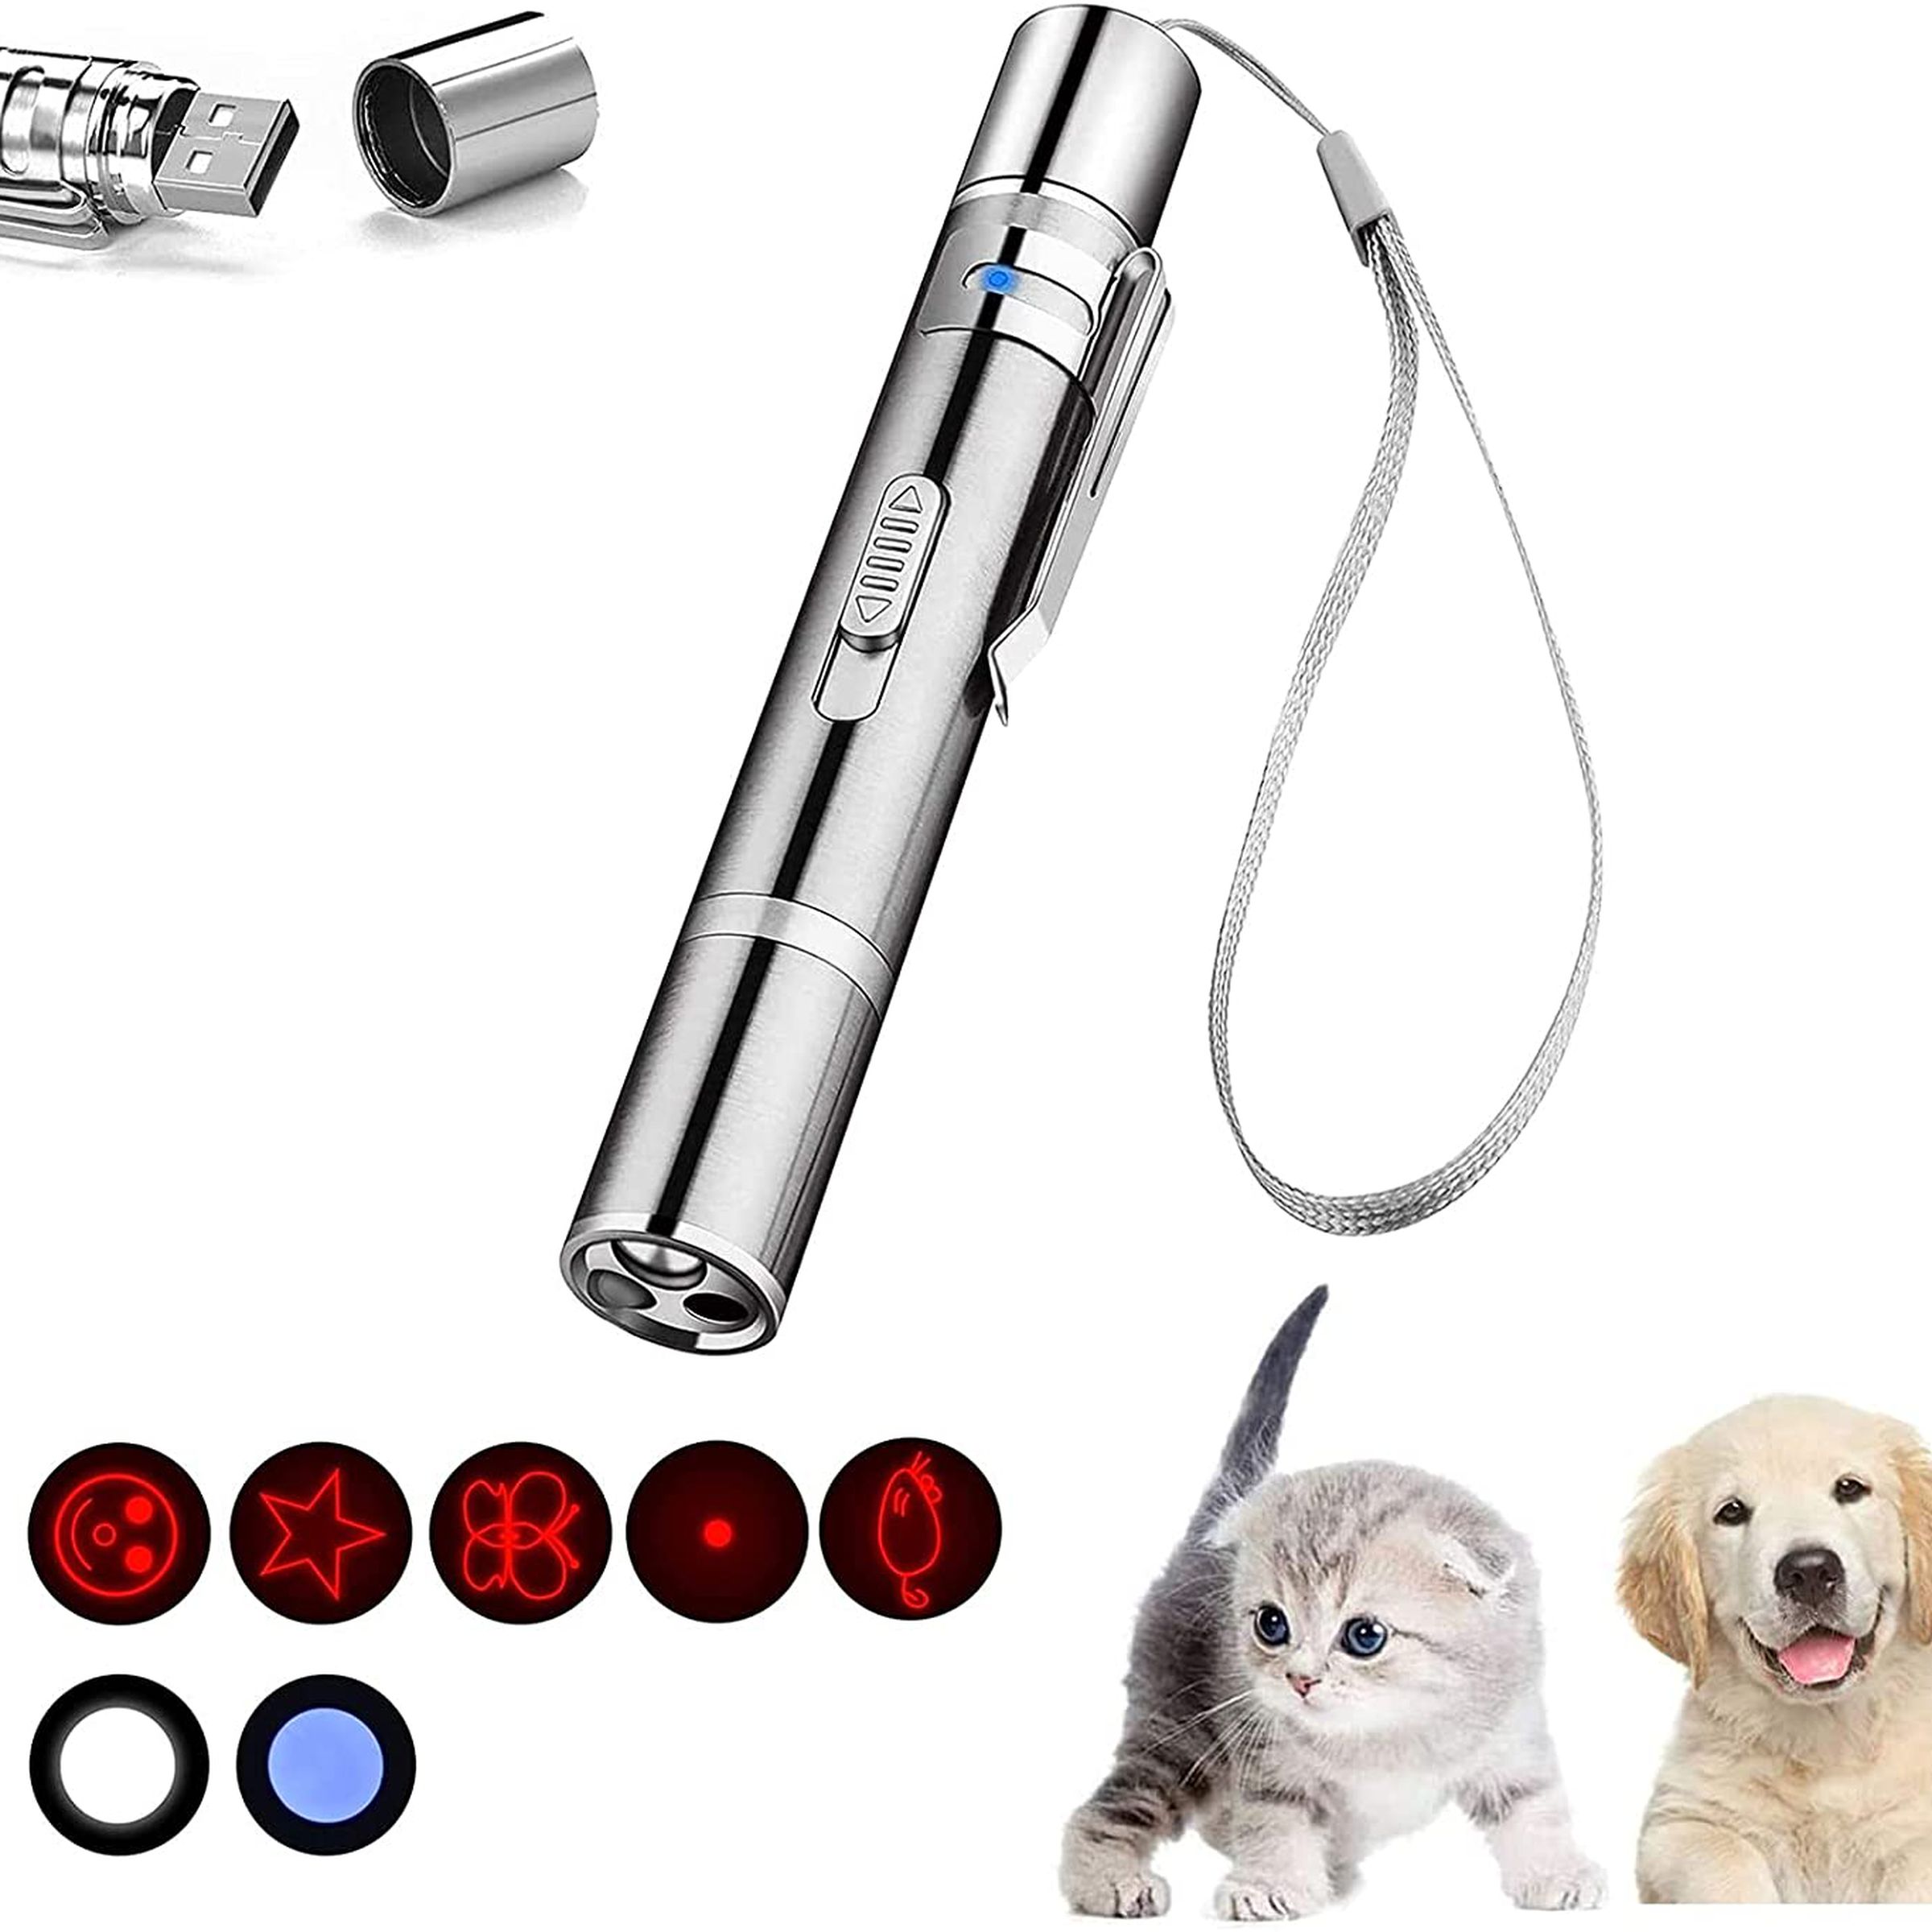 long, silver laser cat toy with available patterns shown on the lower left, and a puppy and kitten on the lower right.